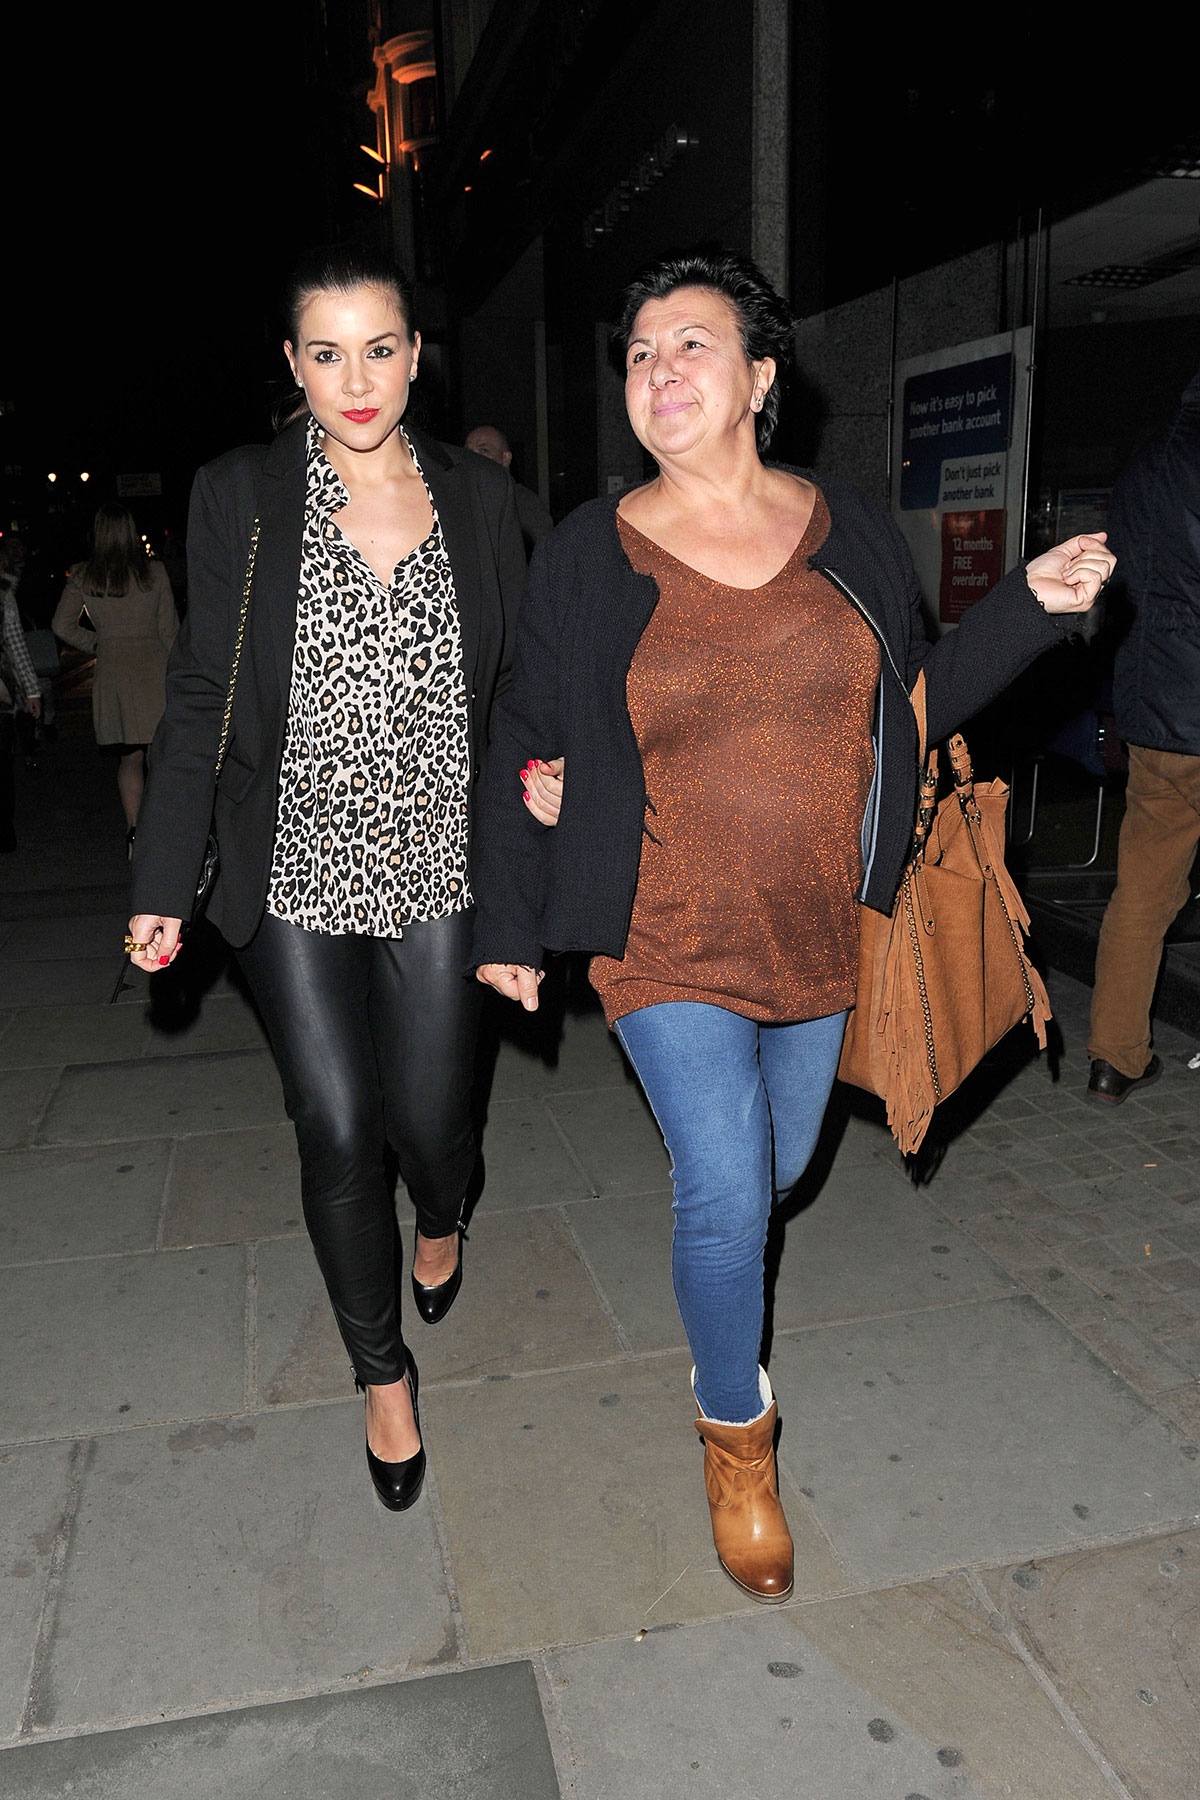 Imogen Thomas goes to see The Bodyguard Musical